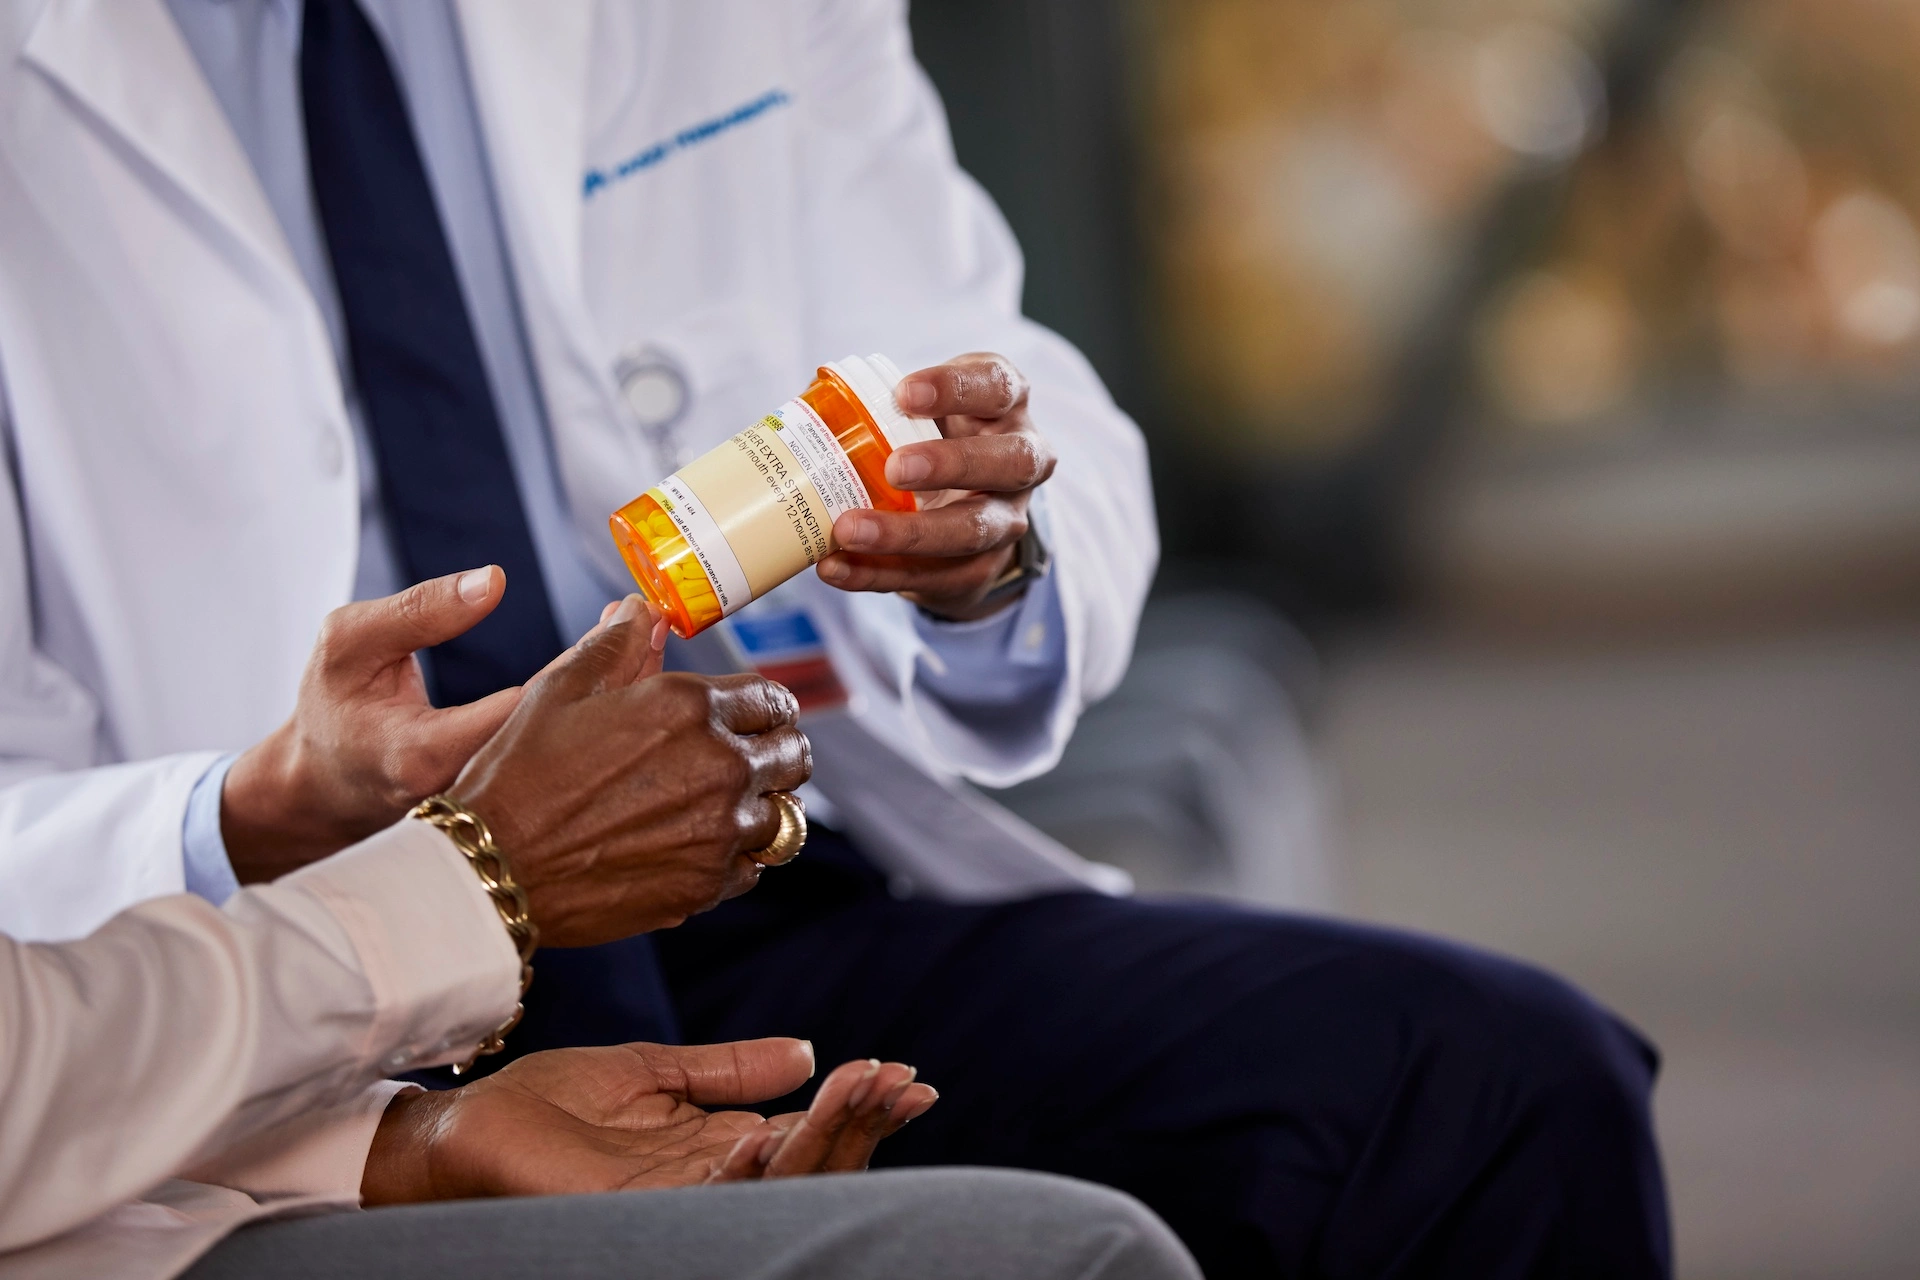 pharmacist seated in white coat holding a pill bottle and handing it to a seated patient.